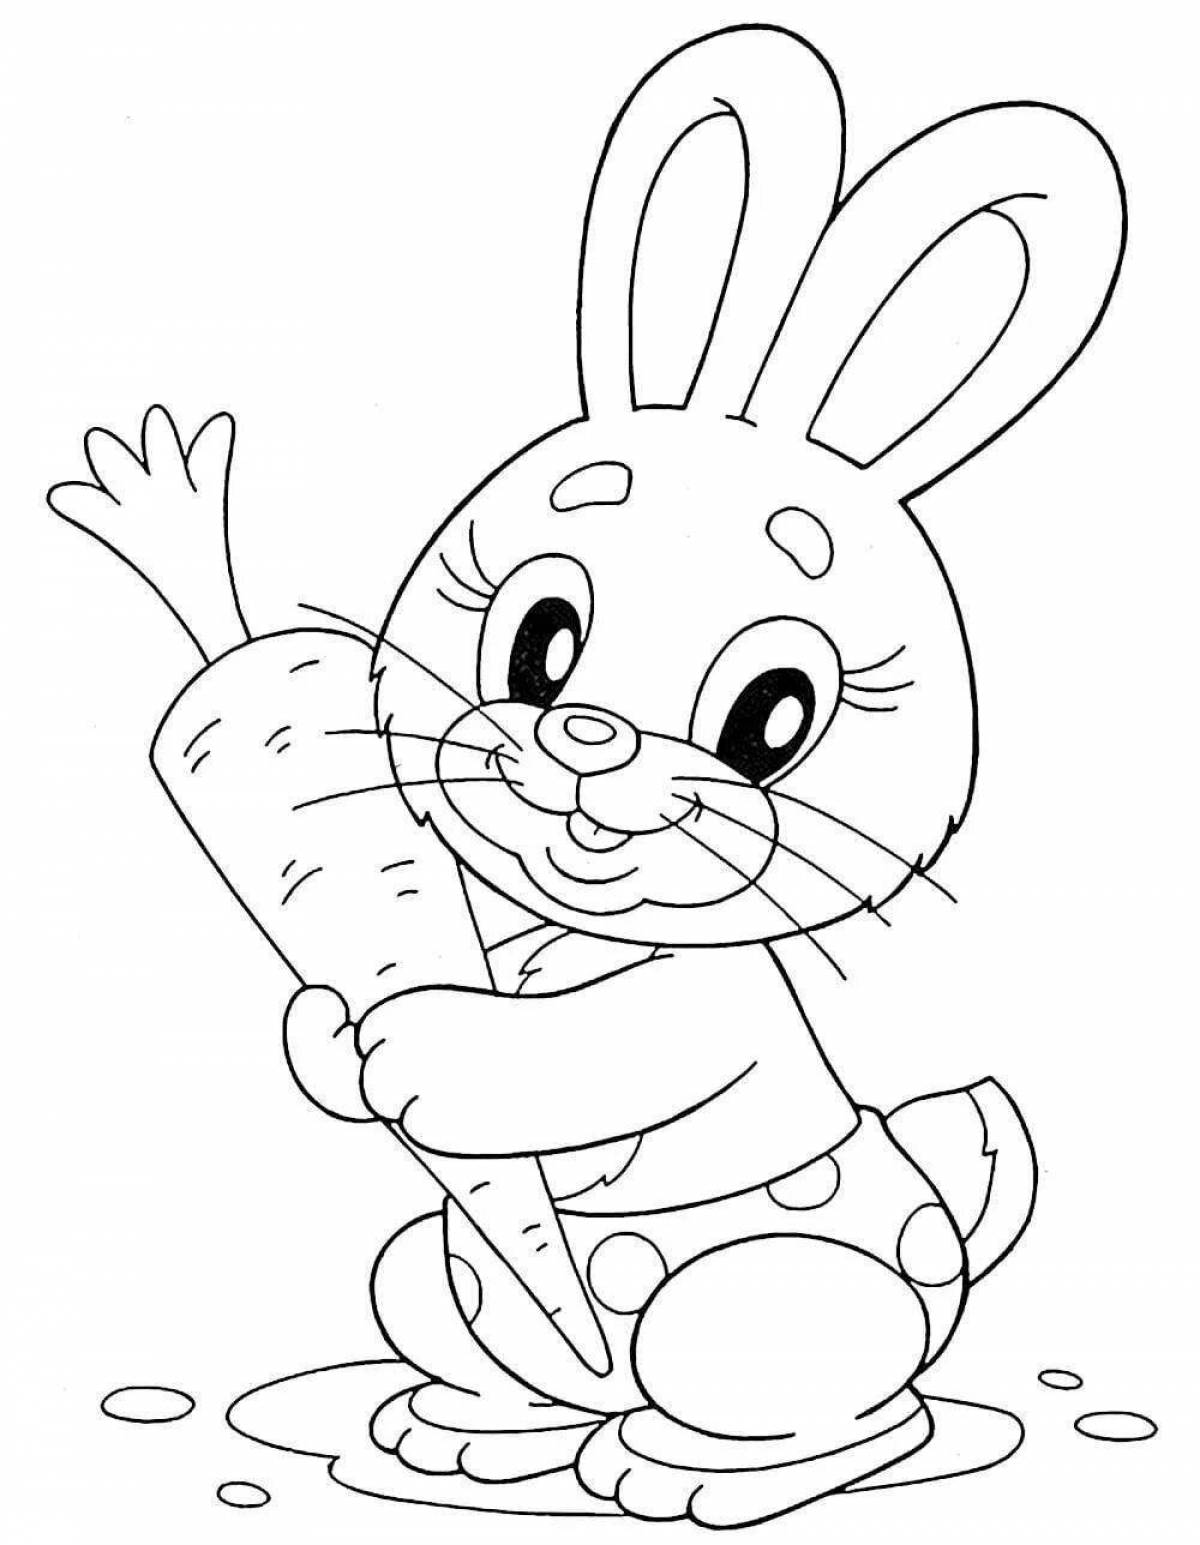 Coloring book elegant hare for children 6-7 years old